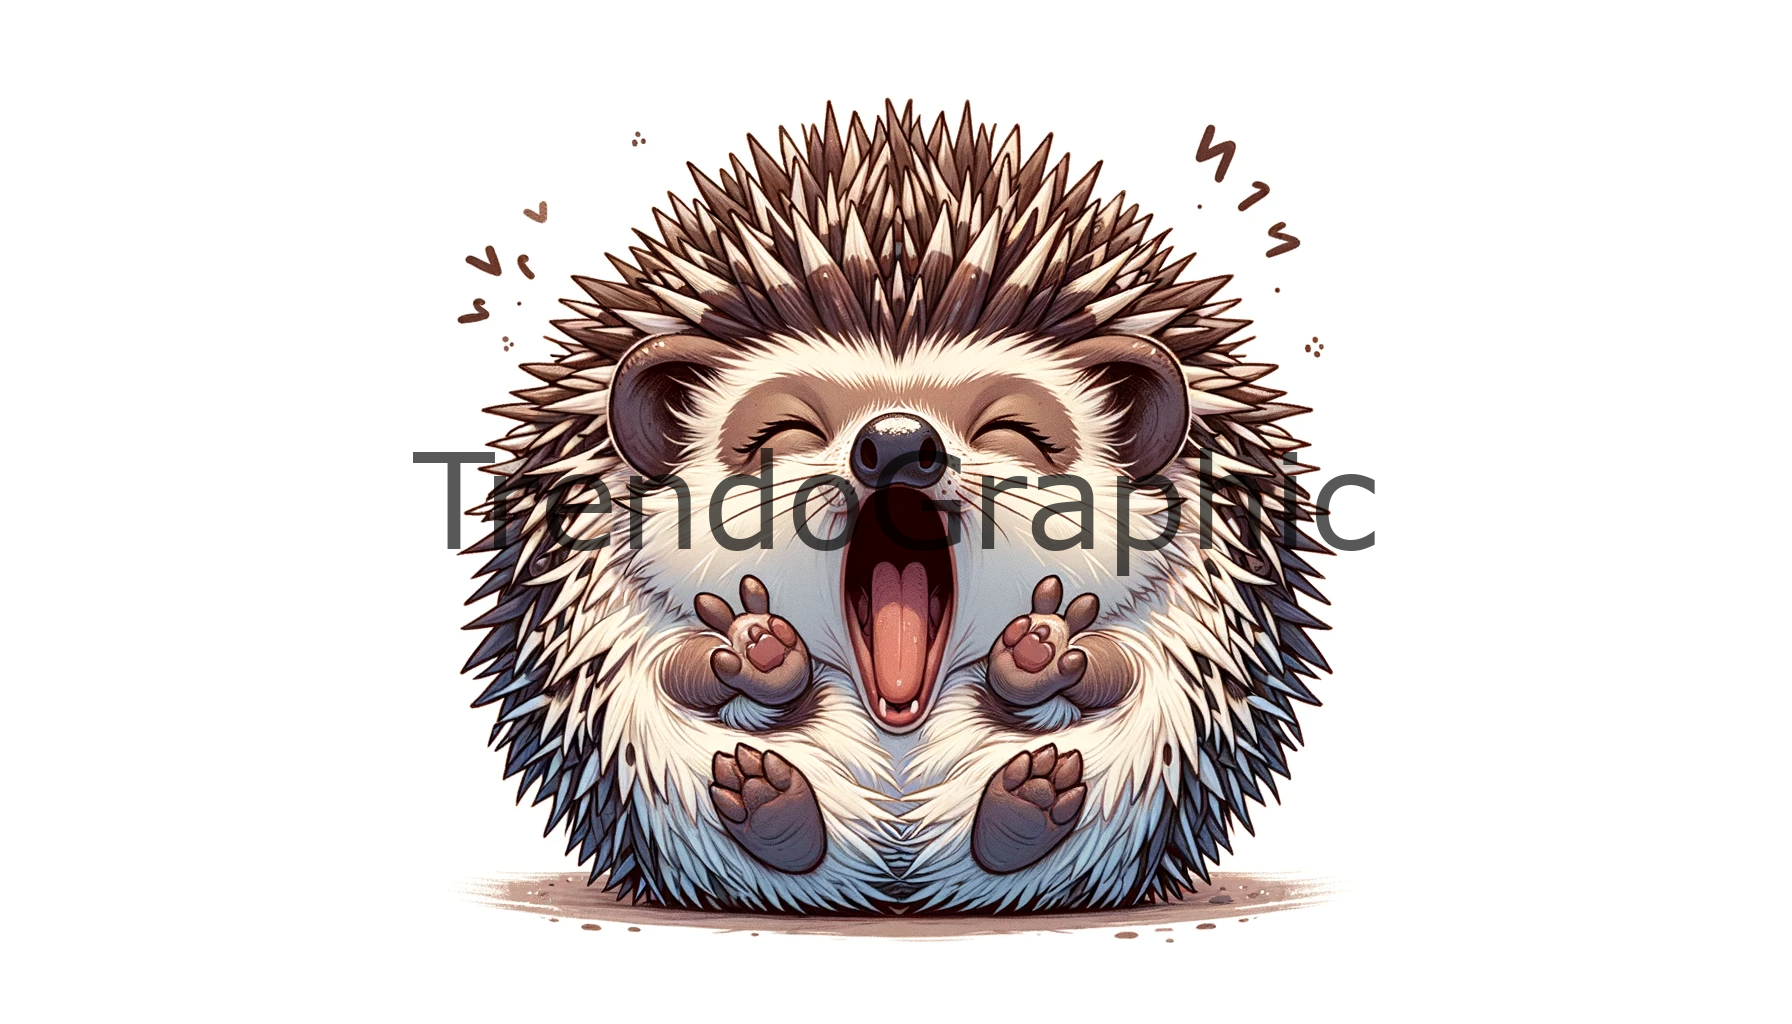 Captivating Yawn: The Hedgehog’s Mid-Yawn Moment